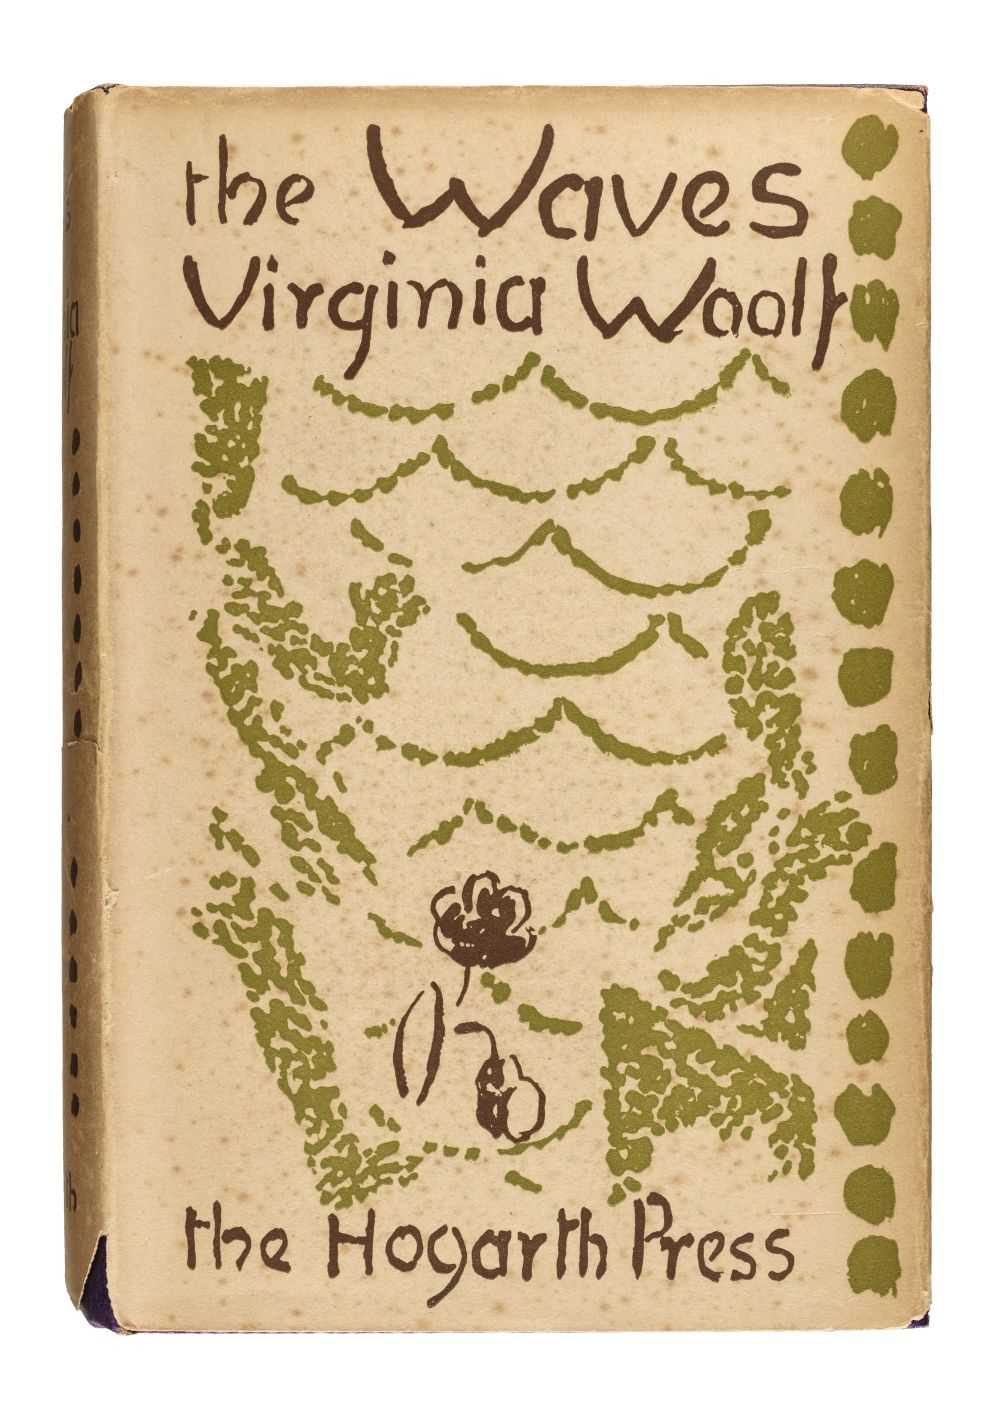 Lot 621 - Woolf (Virginia). The Waves, 1st edition, 1931